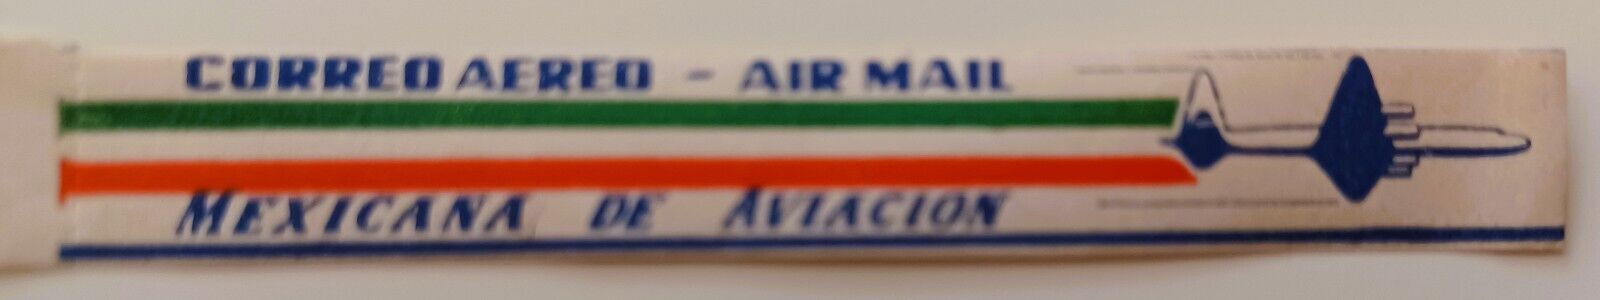 MEXICANA Air Mail Etiquette #1 Label Sticker Decal